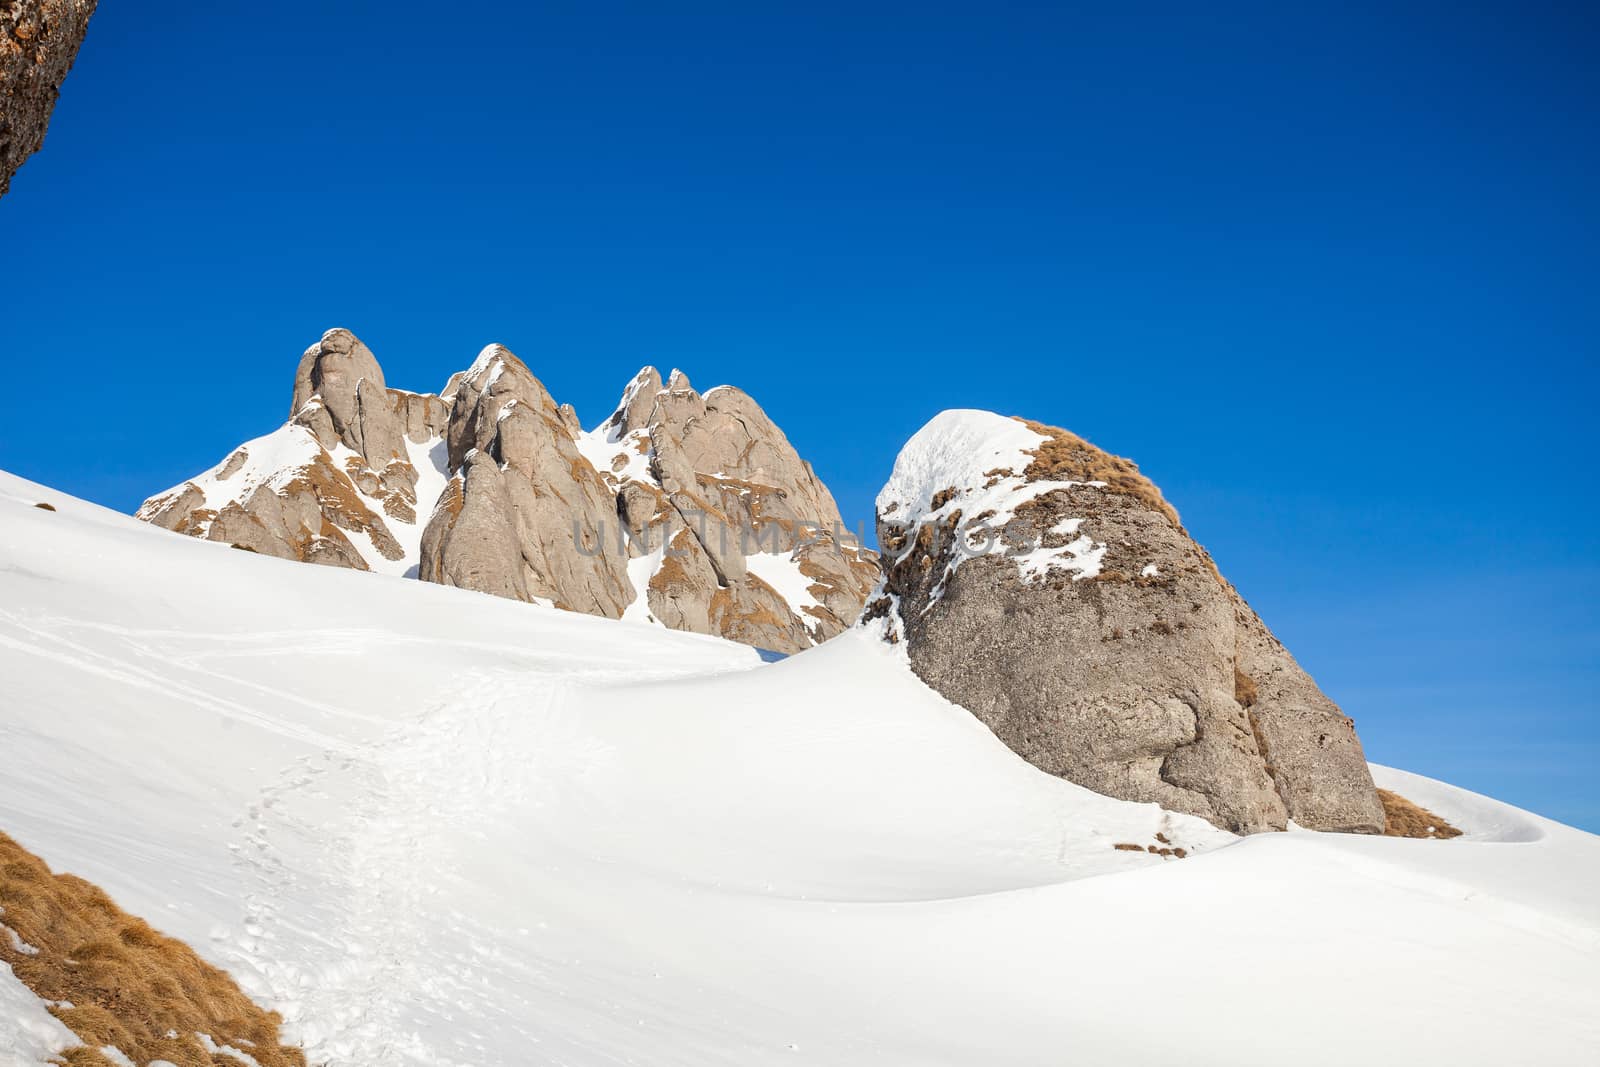 View of Mount Ciucas peak on a sunny winter day with beautiful rock formations, part of Romanian Carpathian Range